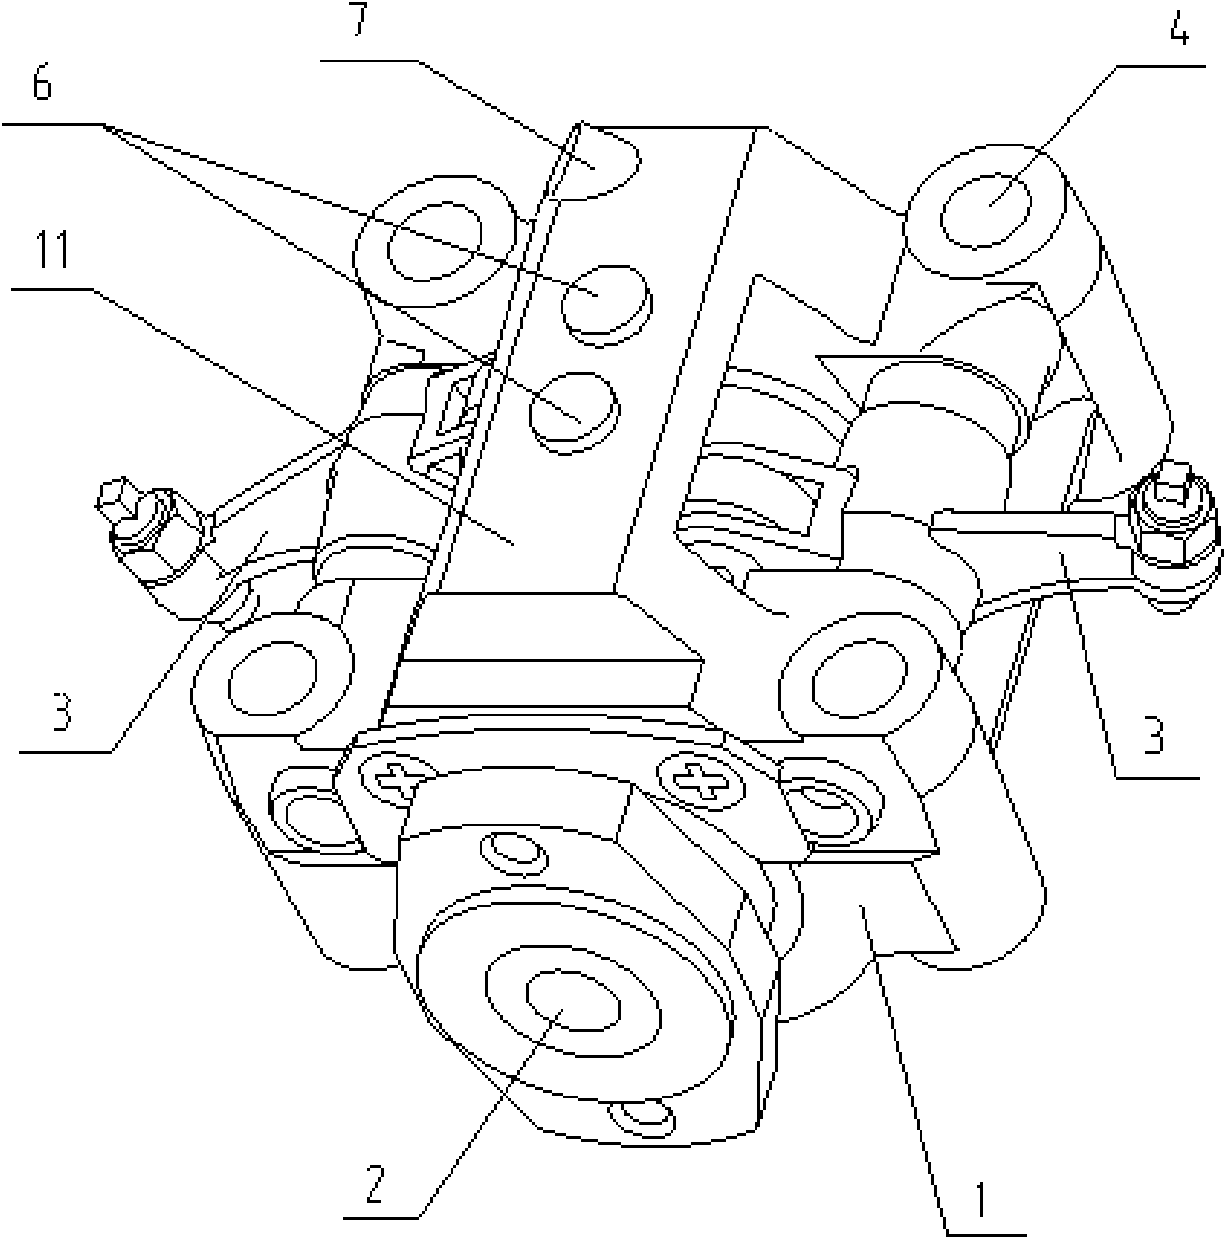 Cam shaft and rocker shaft supporting seat of overhead cam shaft type engine